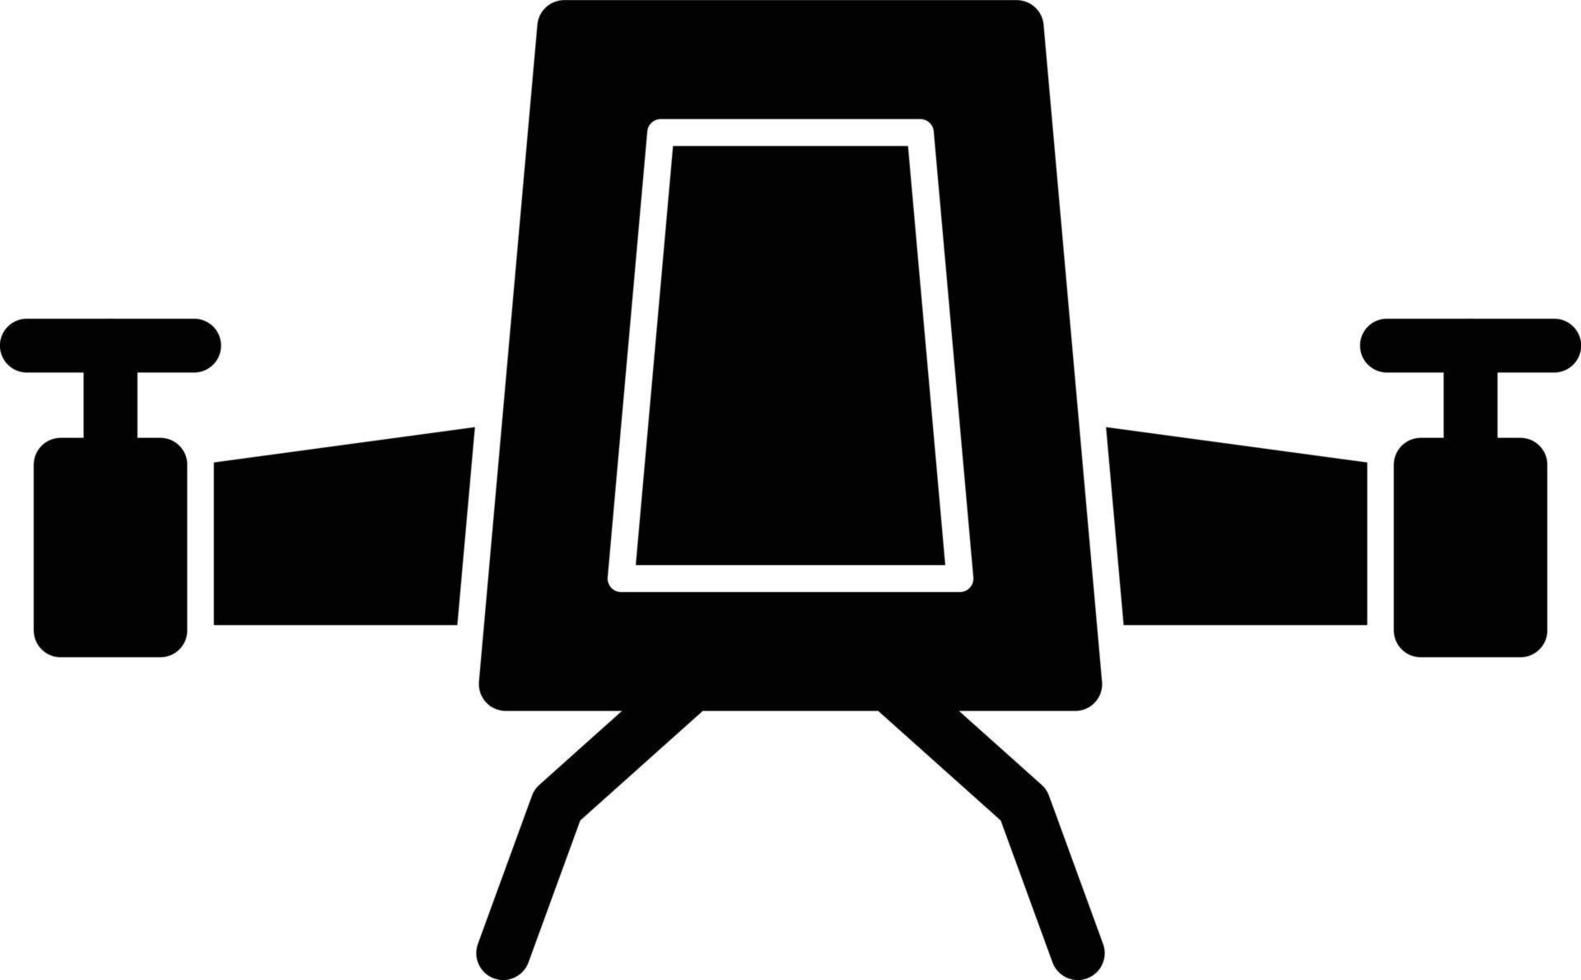 lucht taxi glyph icoon vector